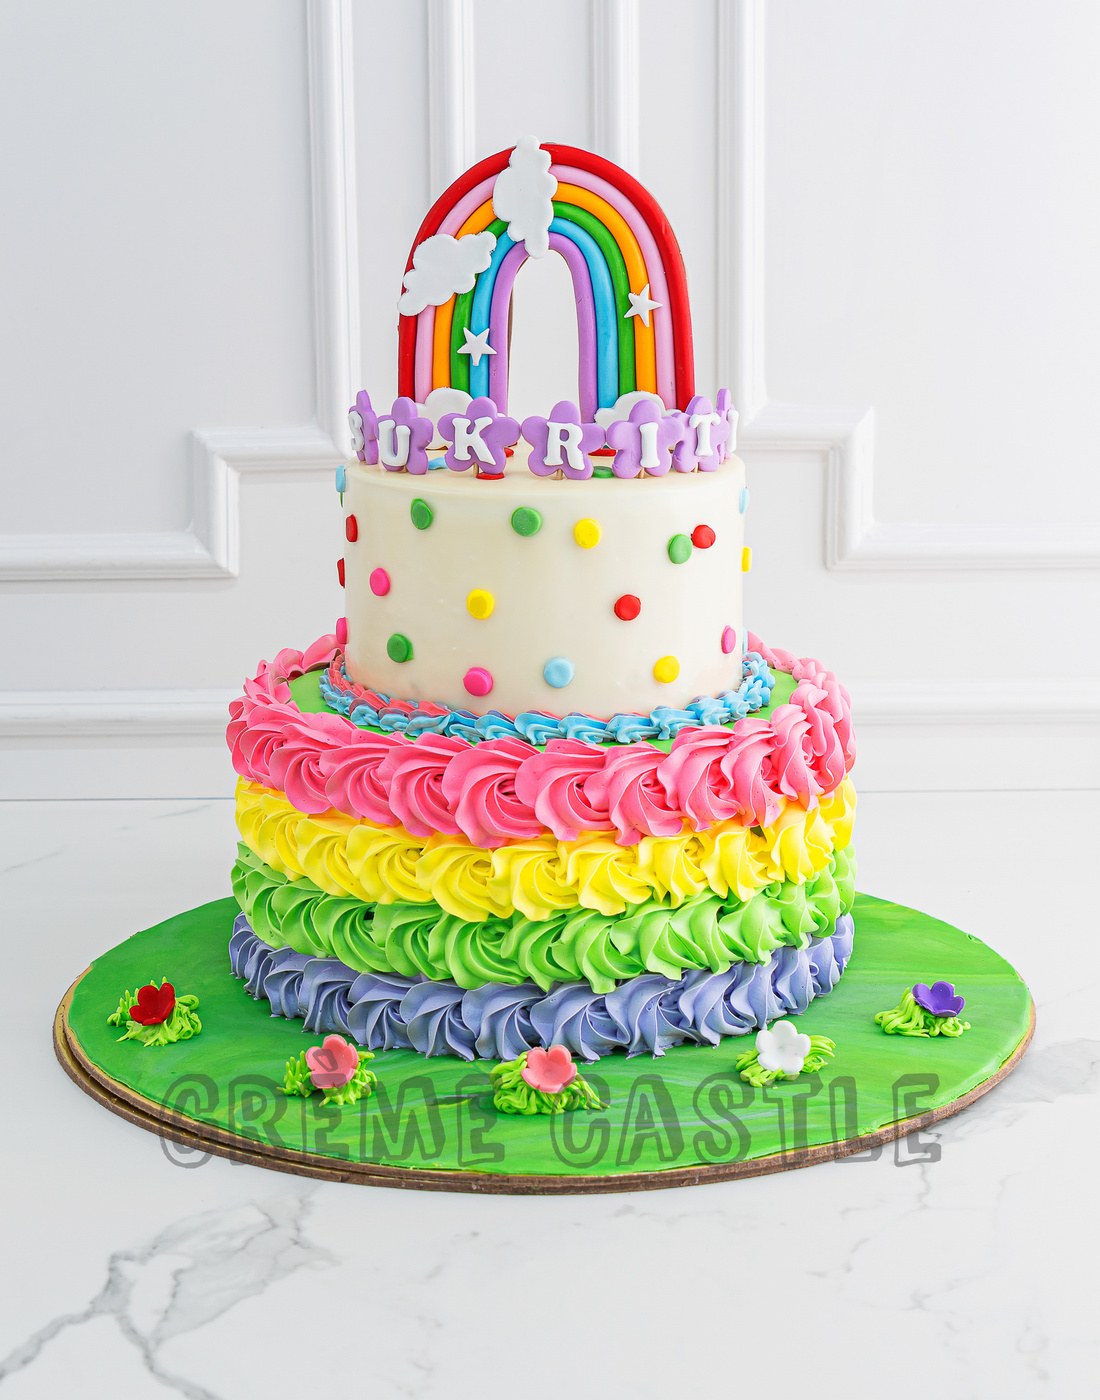 Rainbow Layer Cake (6 Layers with Ombre Rainbow Frosting)